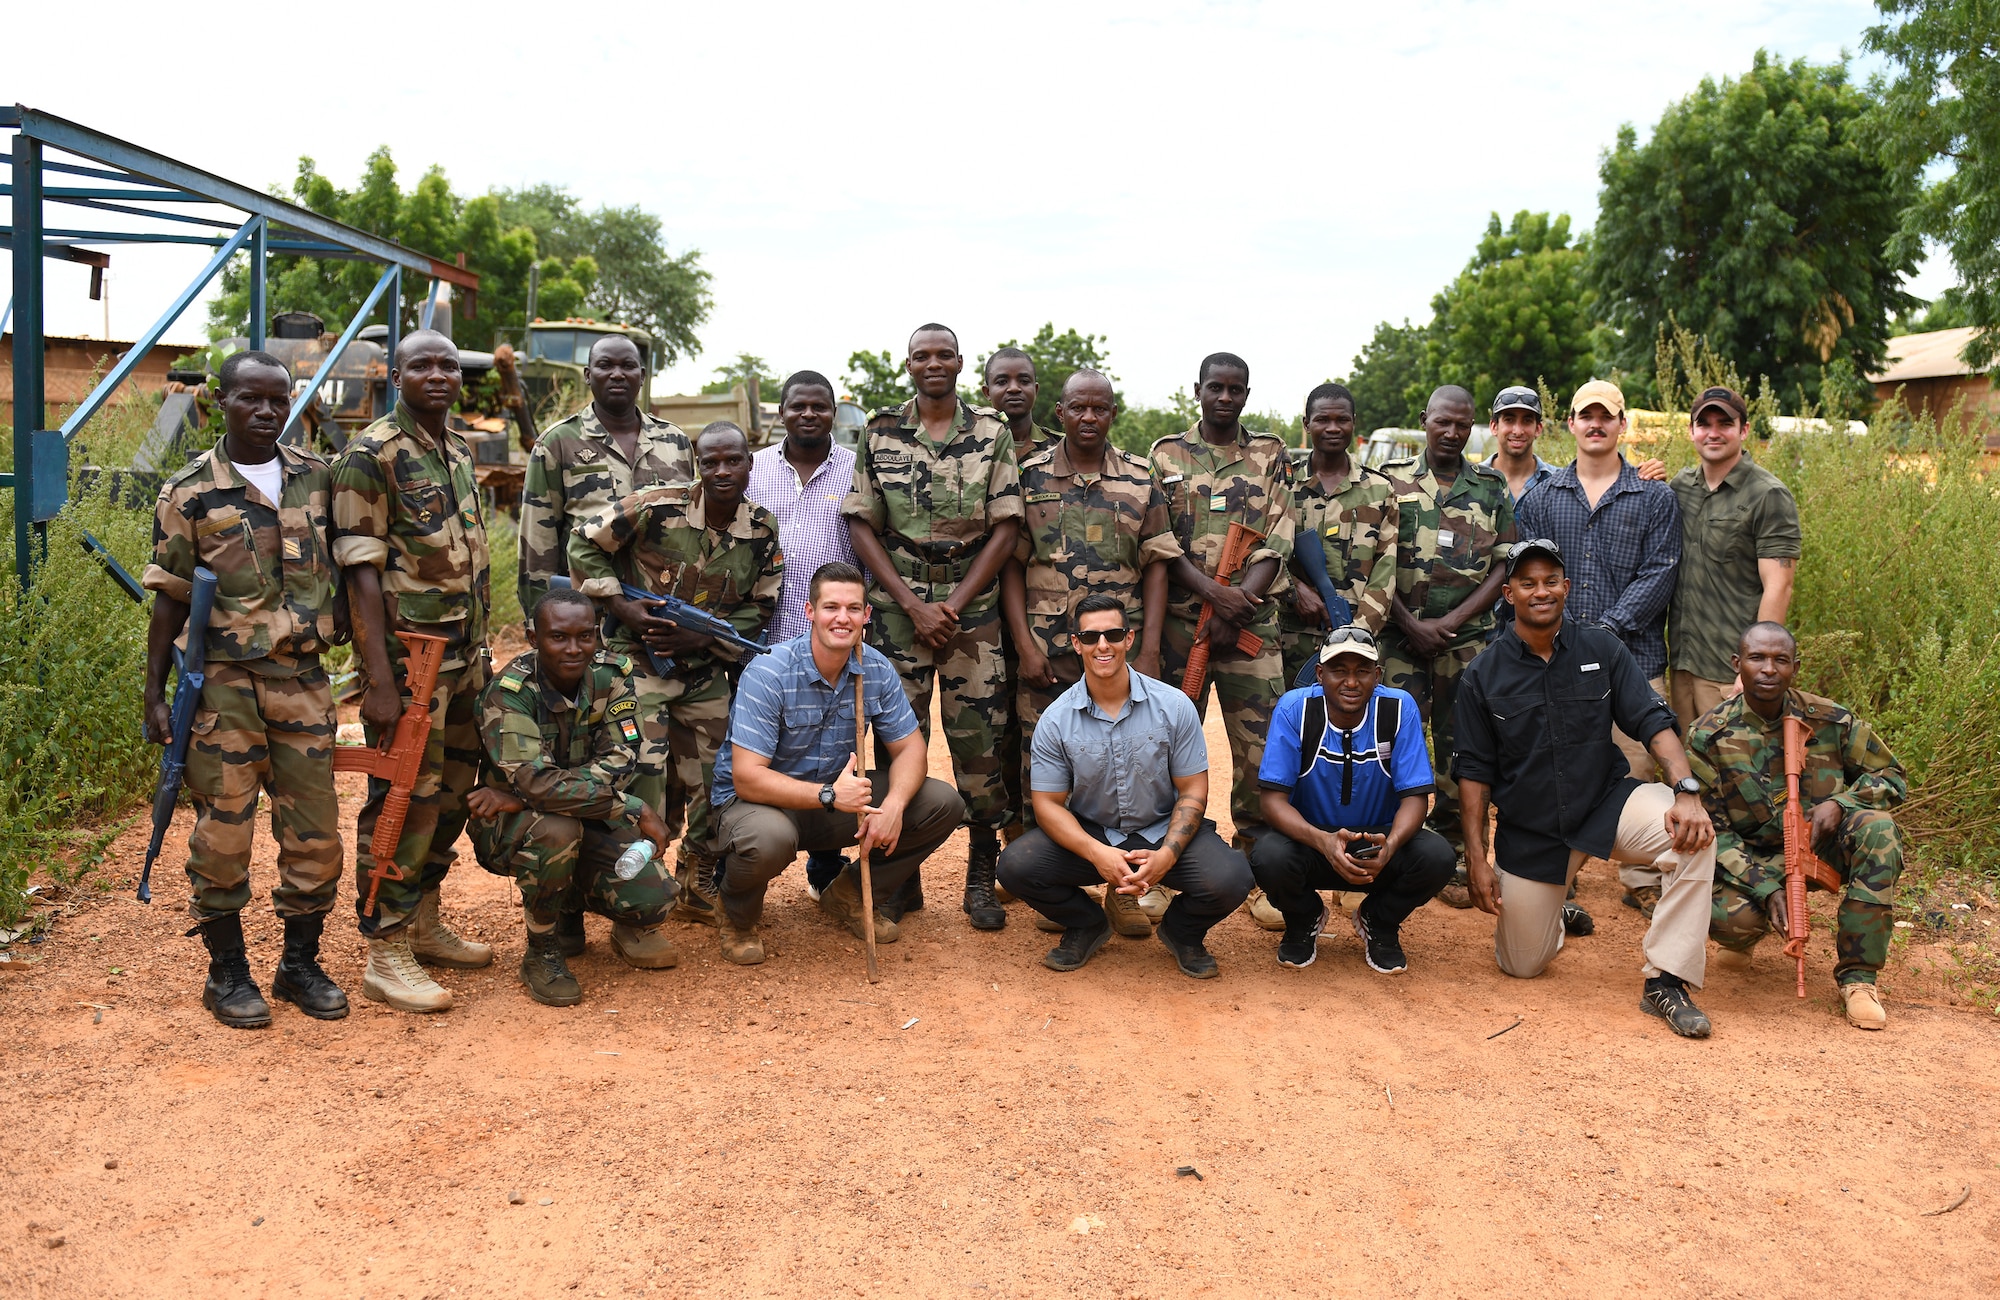 U.S. Air Force Airmen assigned to the 768th Expeditionary Air Base Squadron and members of the Forces Armées Nigeriennes (Nigerien Armed Forces) pose for a photo during an Improvised Explosive Device Awareness Course for the in Niamey, Niger, Oct. 11, 2019. The course is part of a curriculum spanning several months designed to improve the FAN’s effectiveness and survivability once they deploy to combat the violent extremist organizations in West Africa. (U.S. Air Force photo by Staff Sgt. Alex Fox Echols III)